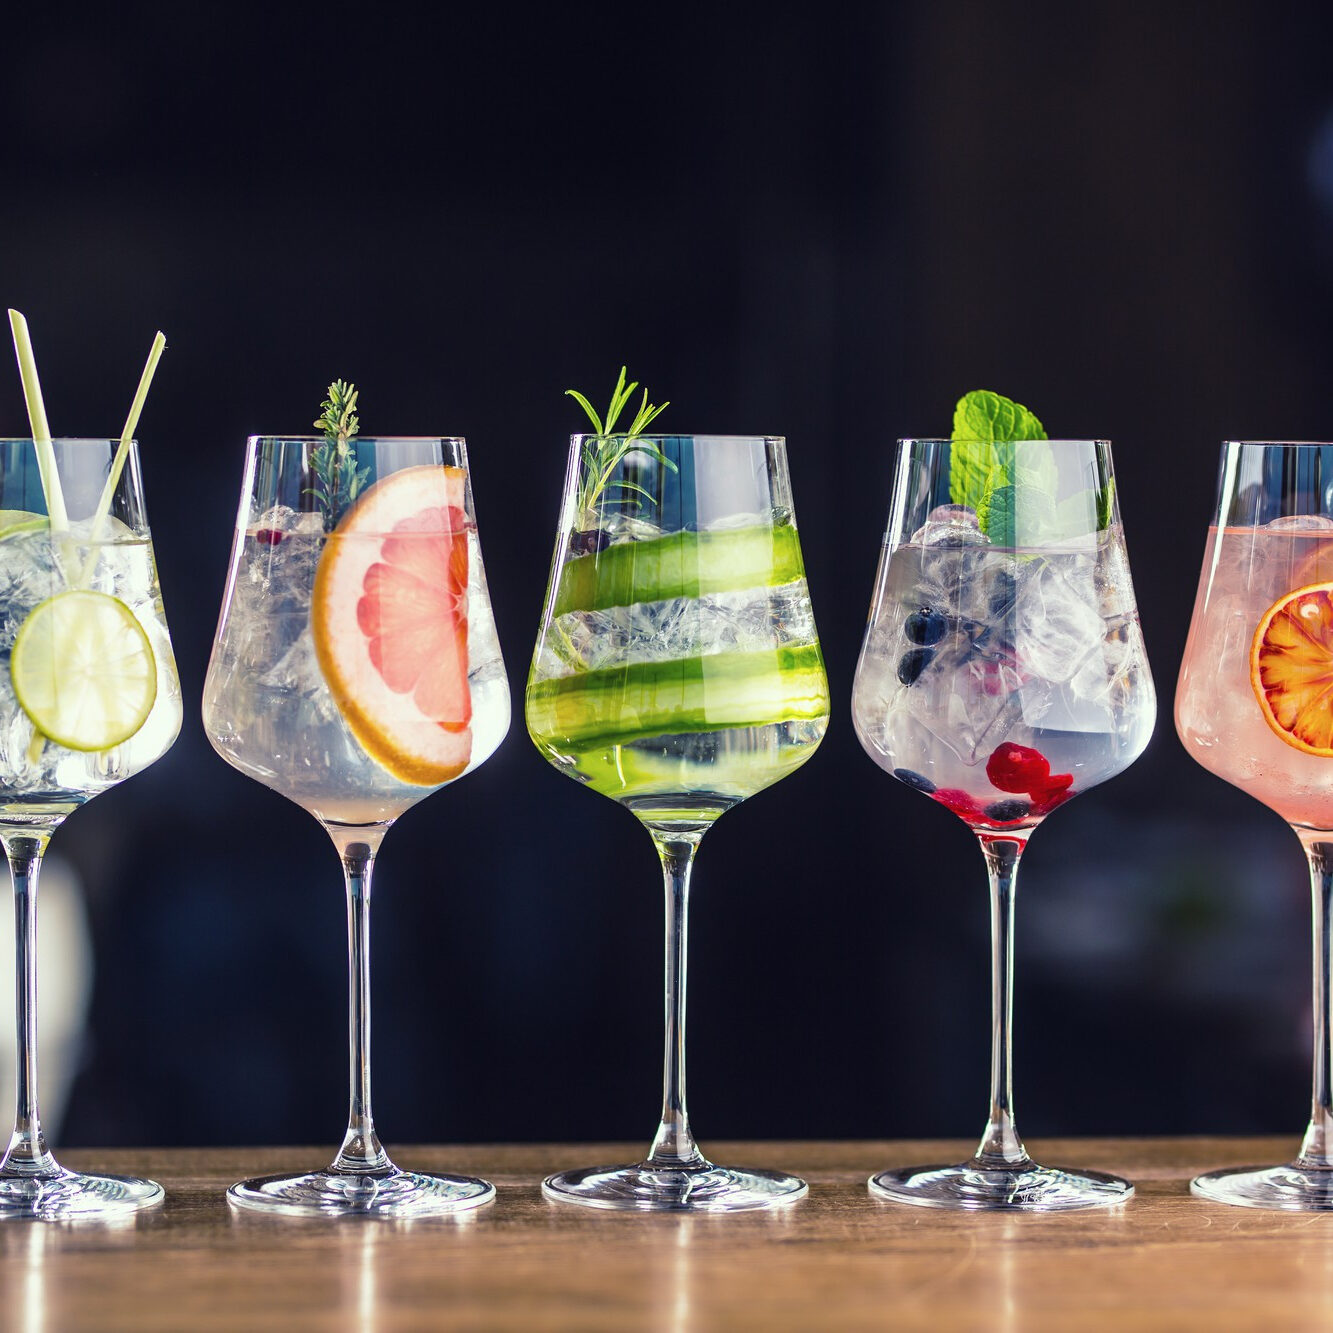 five-colorful-gin-tonic-cocktails-wine-glasses-bar-counter-pup-restaurant